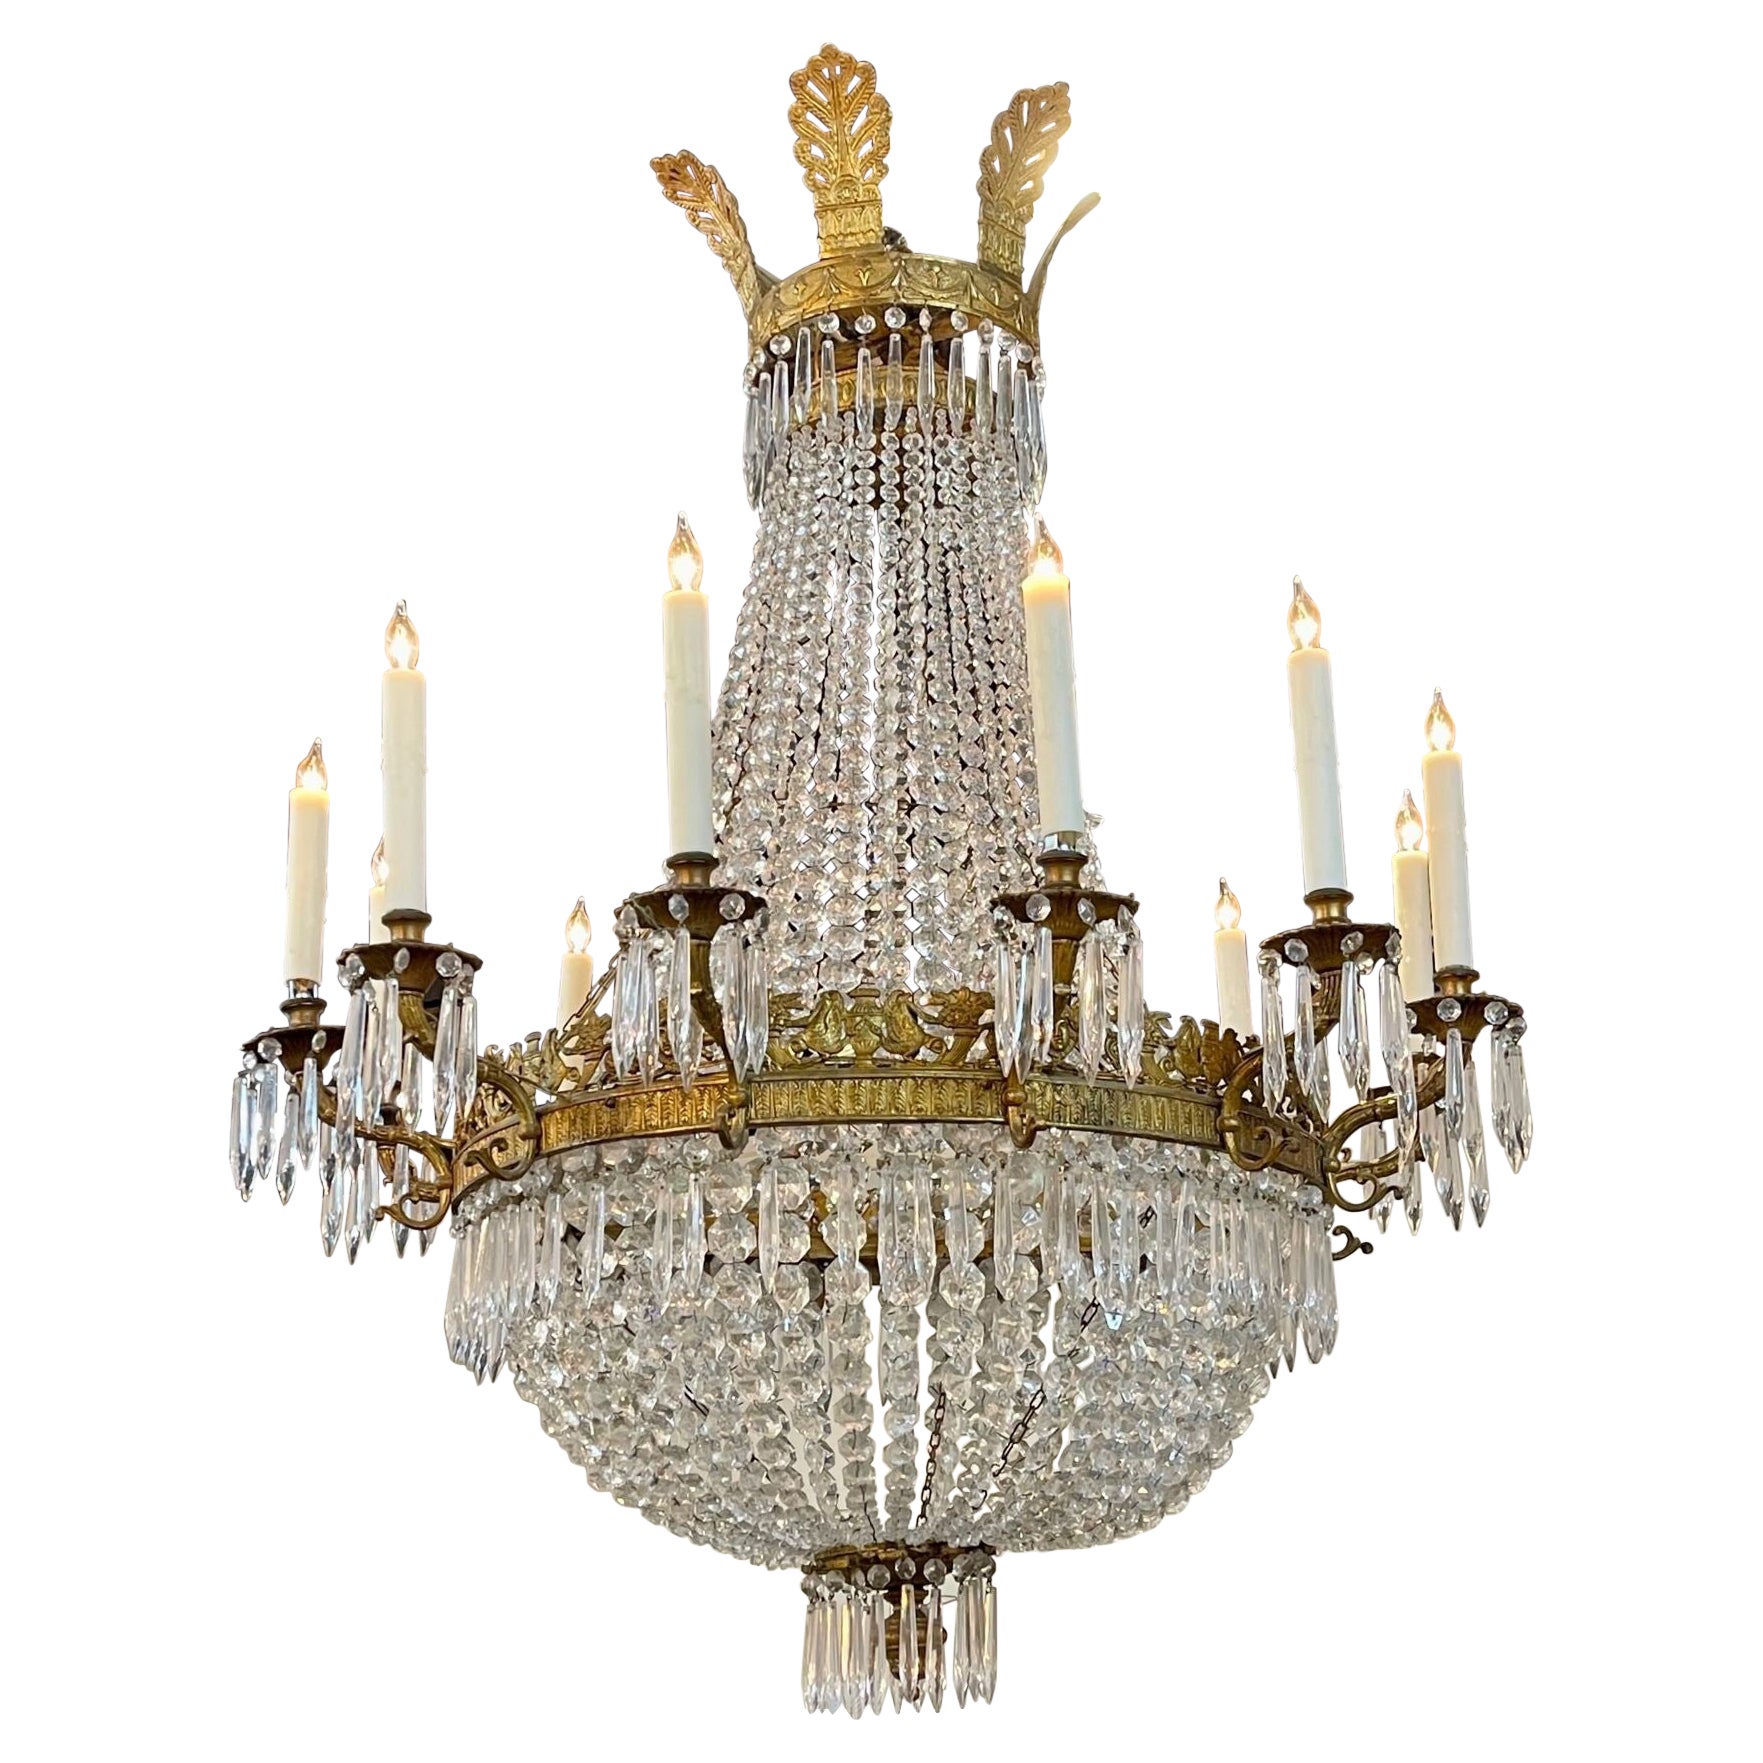 19th Century French Empire Gilt Bronze and Crystal Chandelier